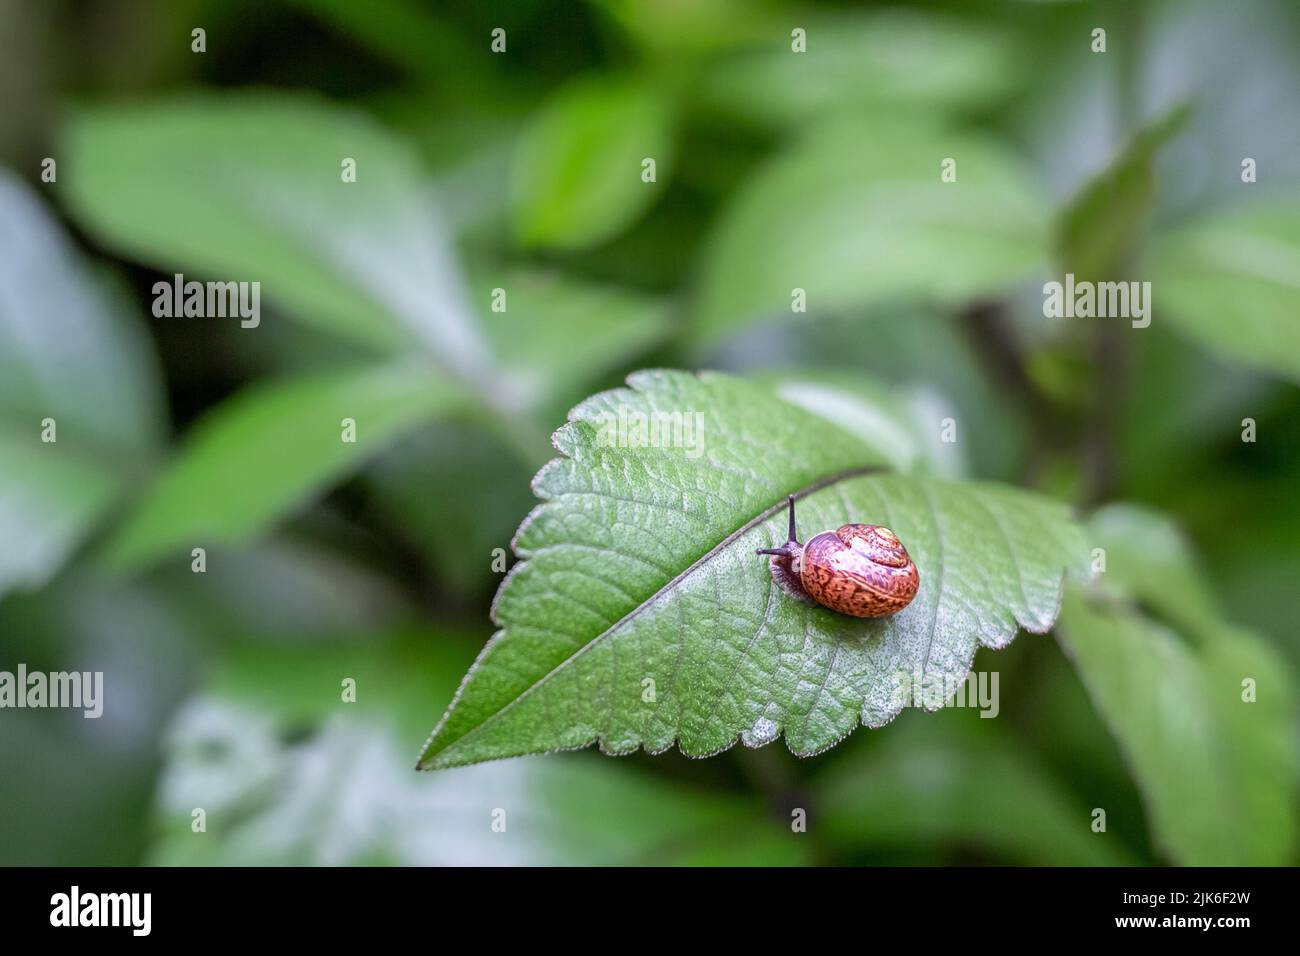 A snail with horns in a patterned iridescent lacquered shell on a large beautiful green leaf in the evening in the garden. Copy space Stock Photo